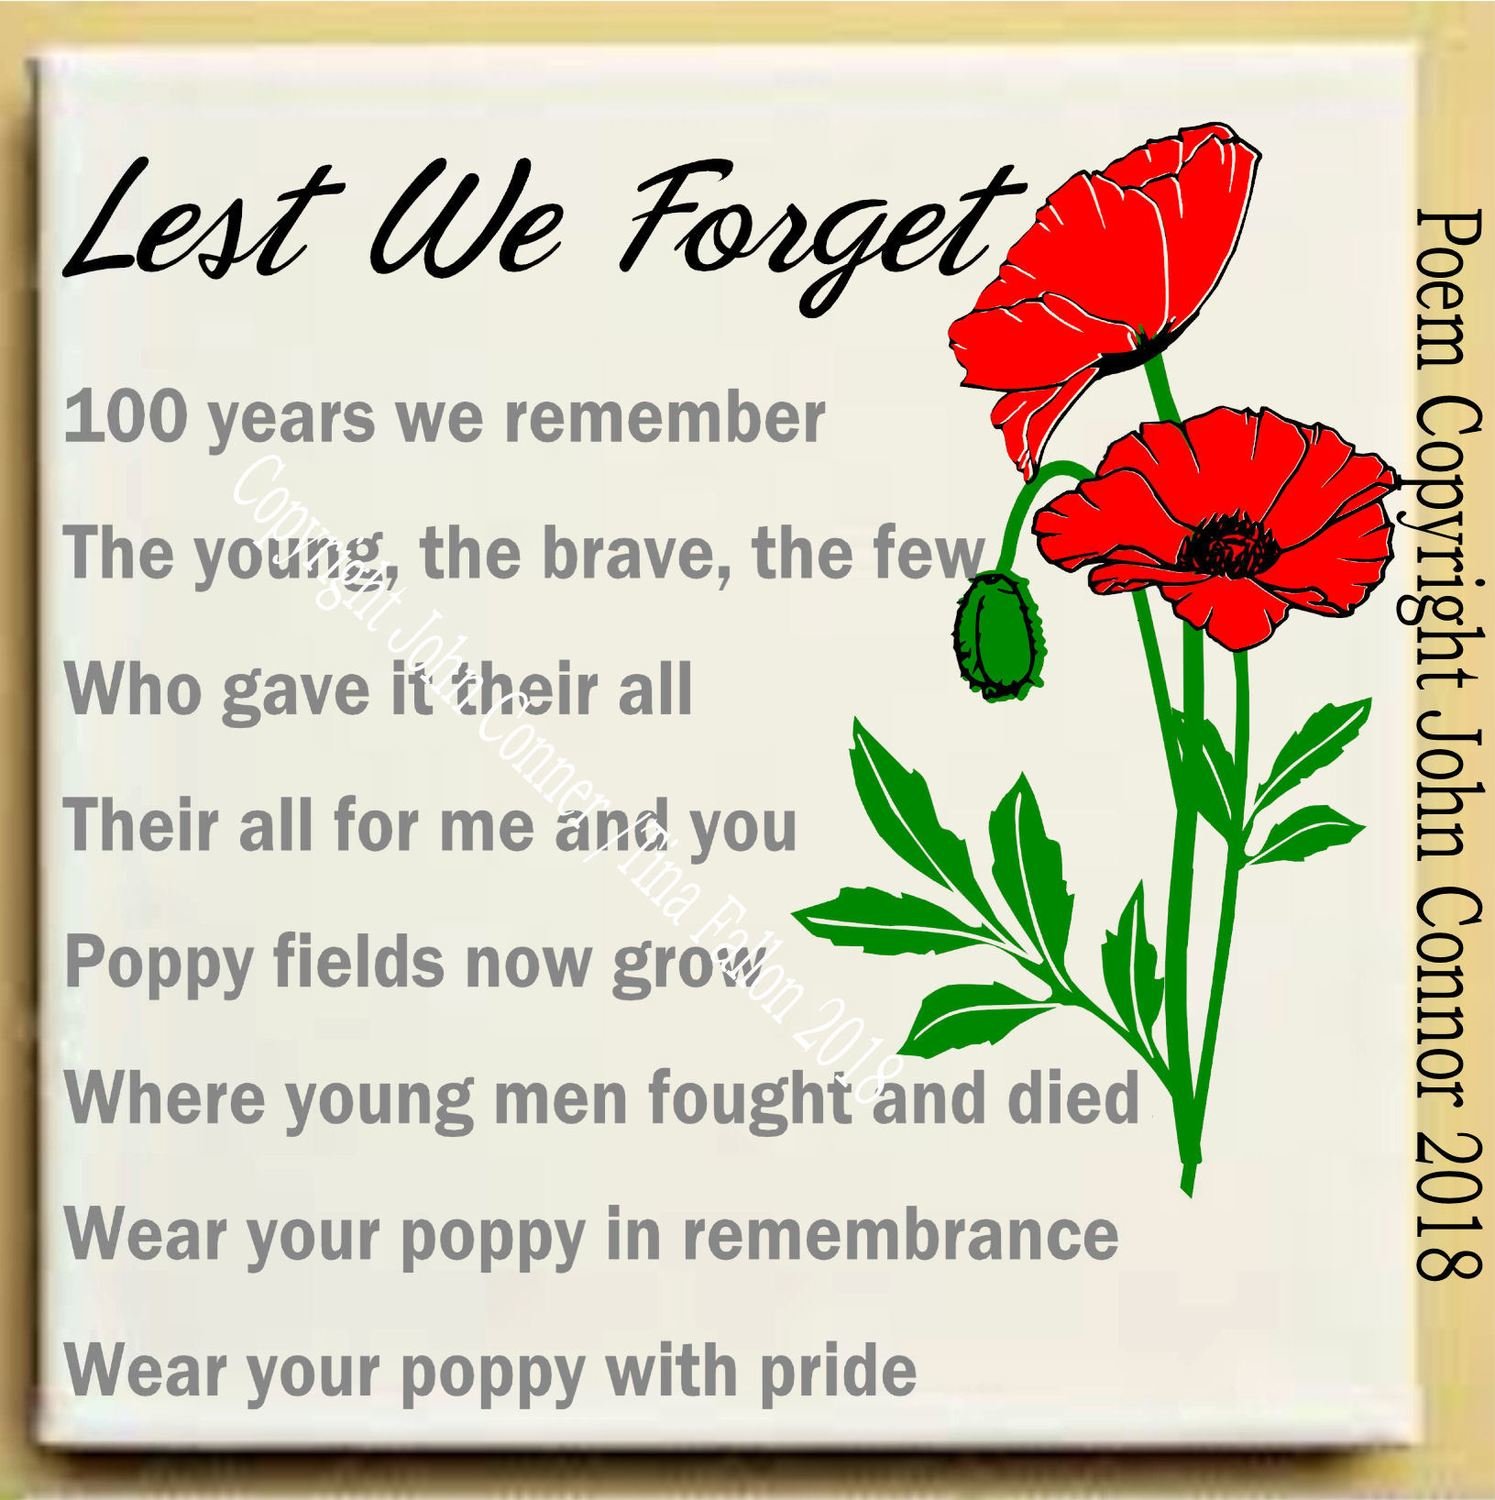 Lest We Forget by John Connor  Remembrance Day , Poppy Day , Armistice Day